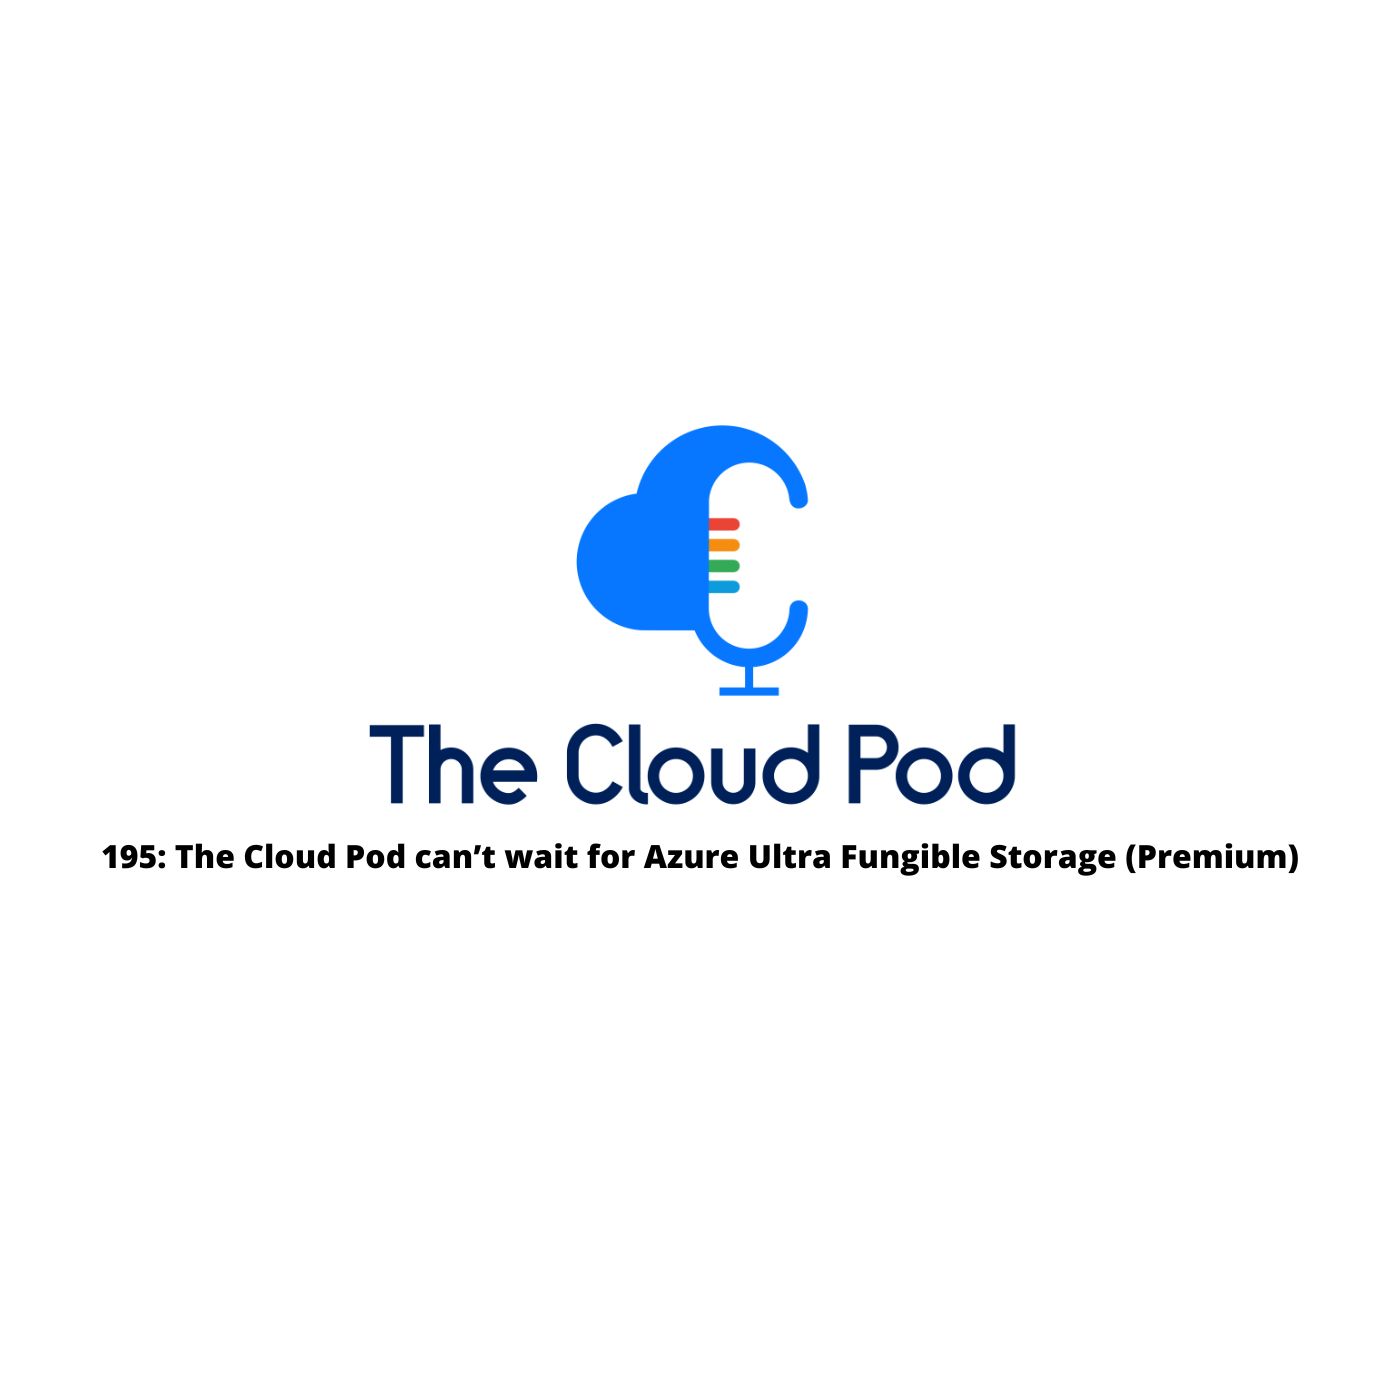 195: The Cloud Pod can’t wait for Azure Ultra Fungible Storage (Premium)!